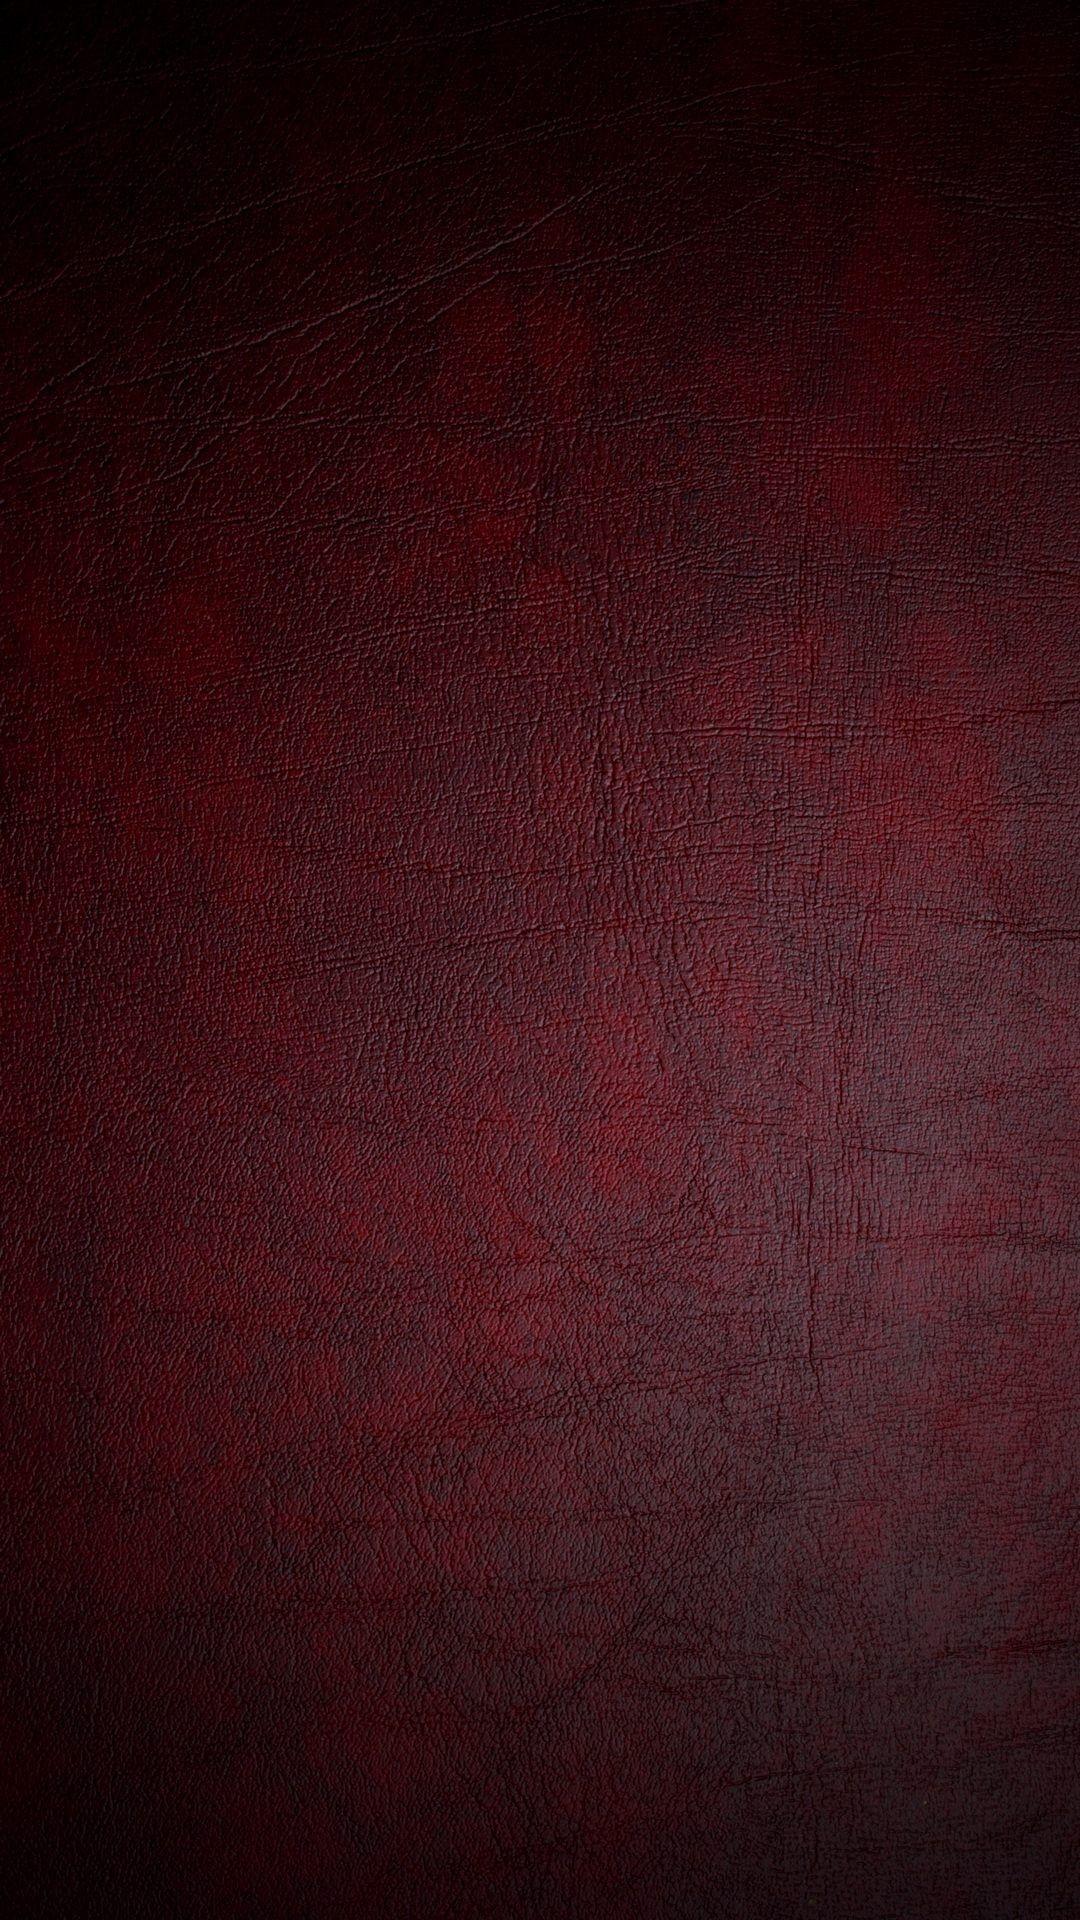 Wallpaper.wiki Leather Iphone Wallpaper Hd PIC WPC006083